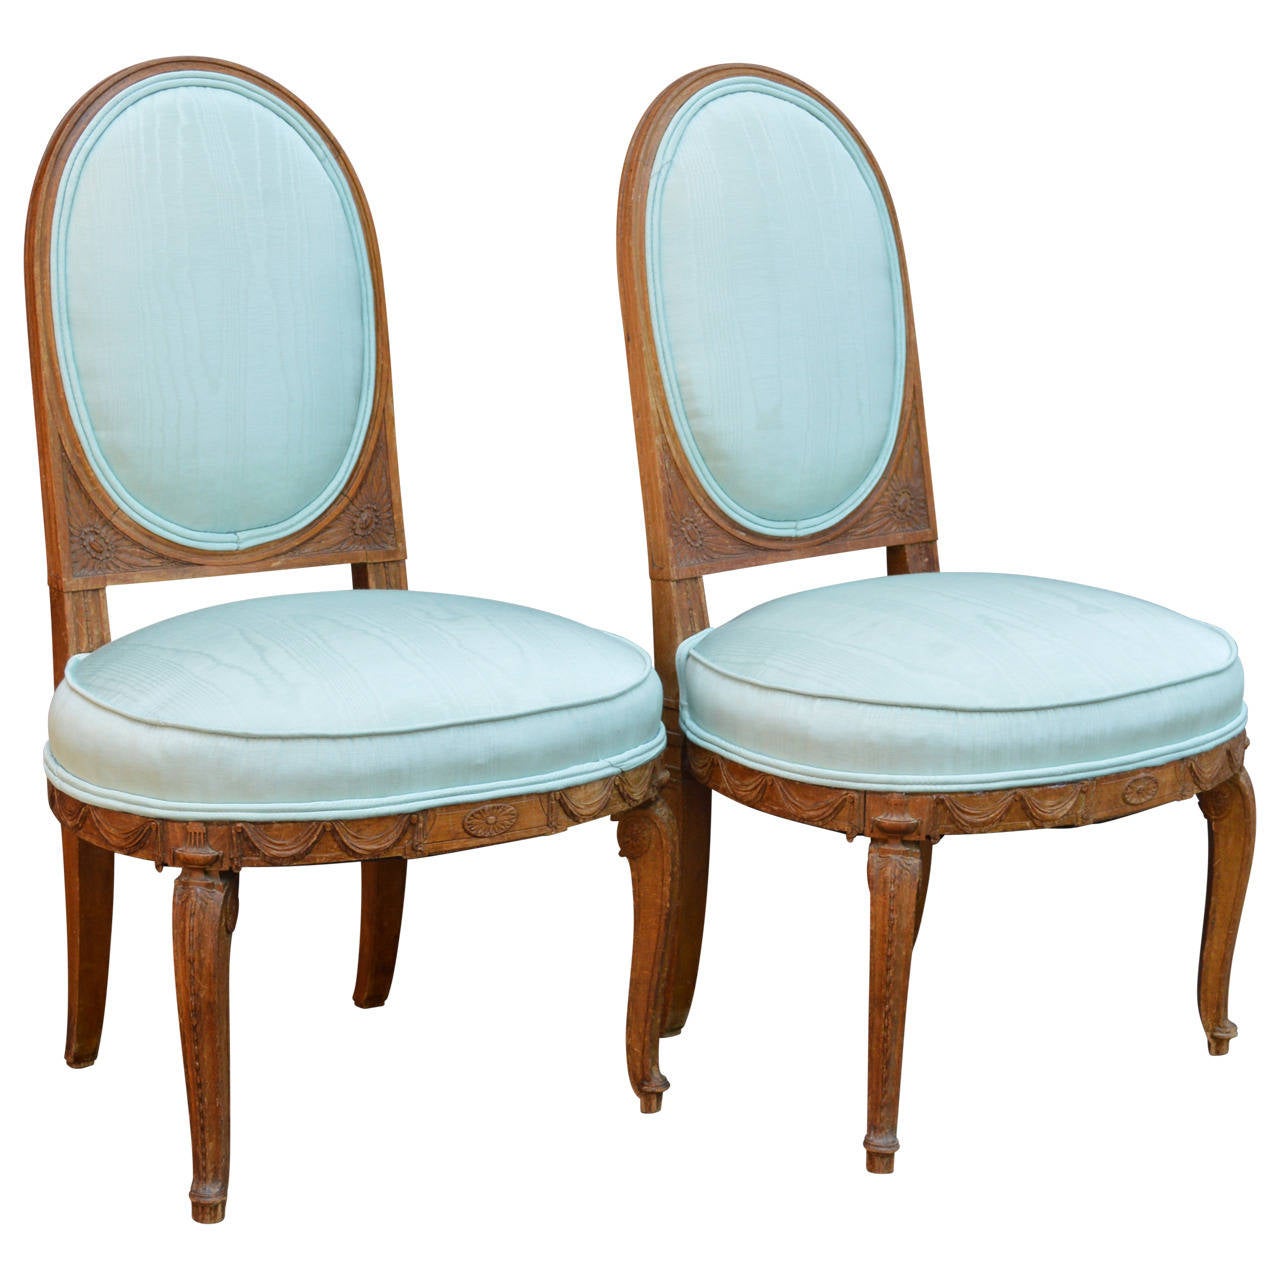 Exquisite pair of Louis XVI slipper chairs, newly upholstered in pale turquoise silk moire.